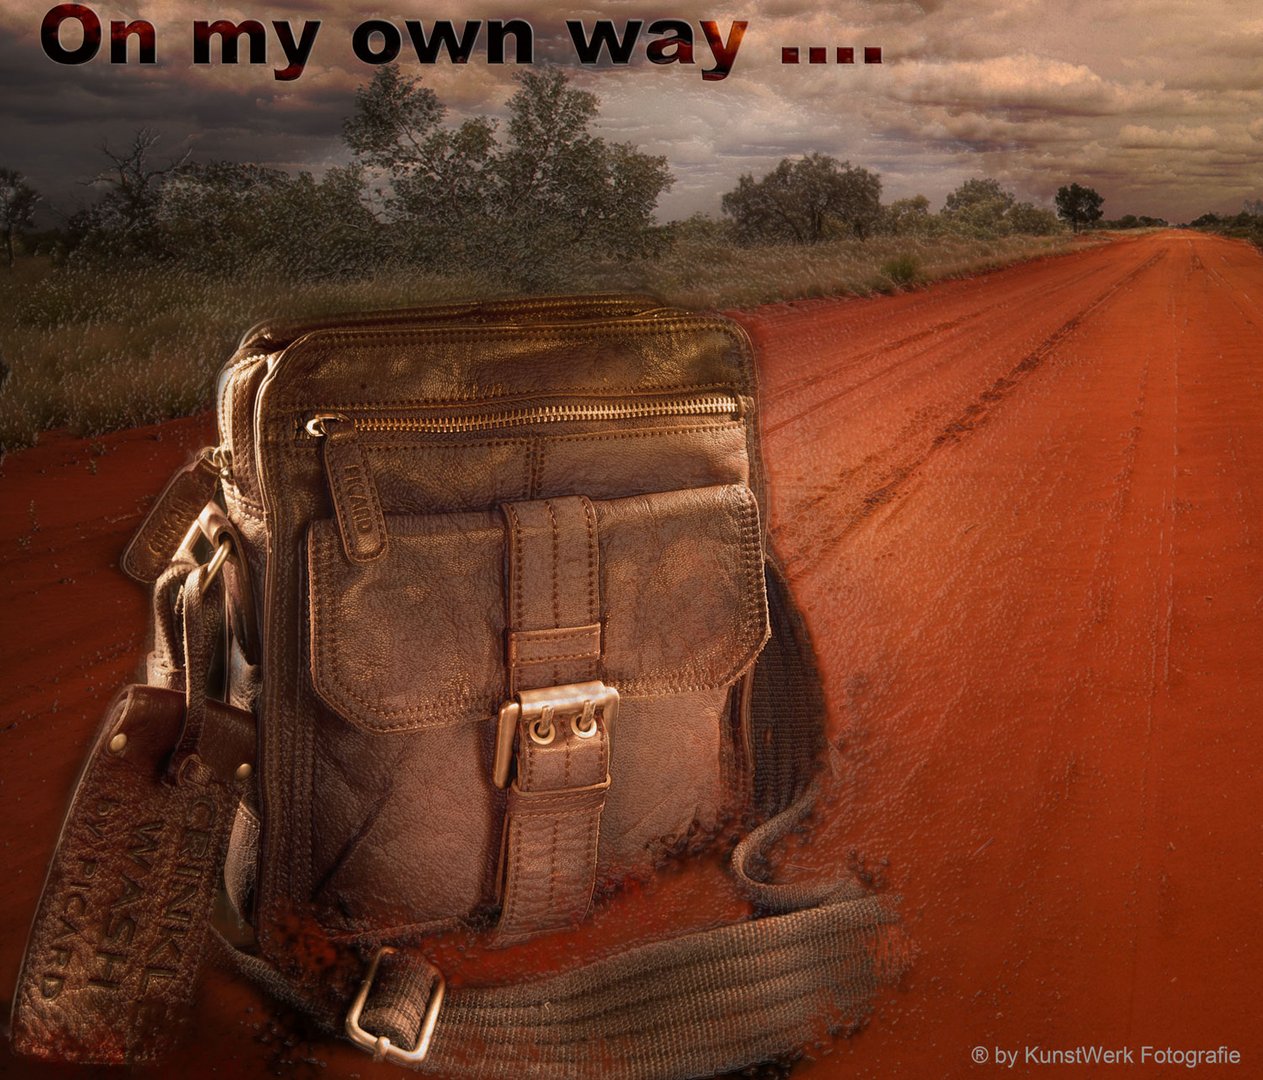 On my own way